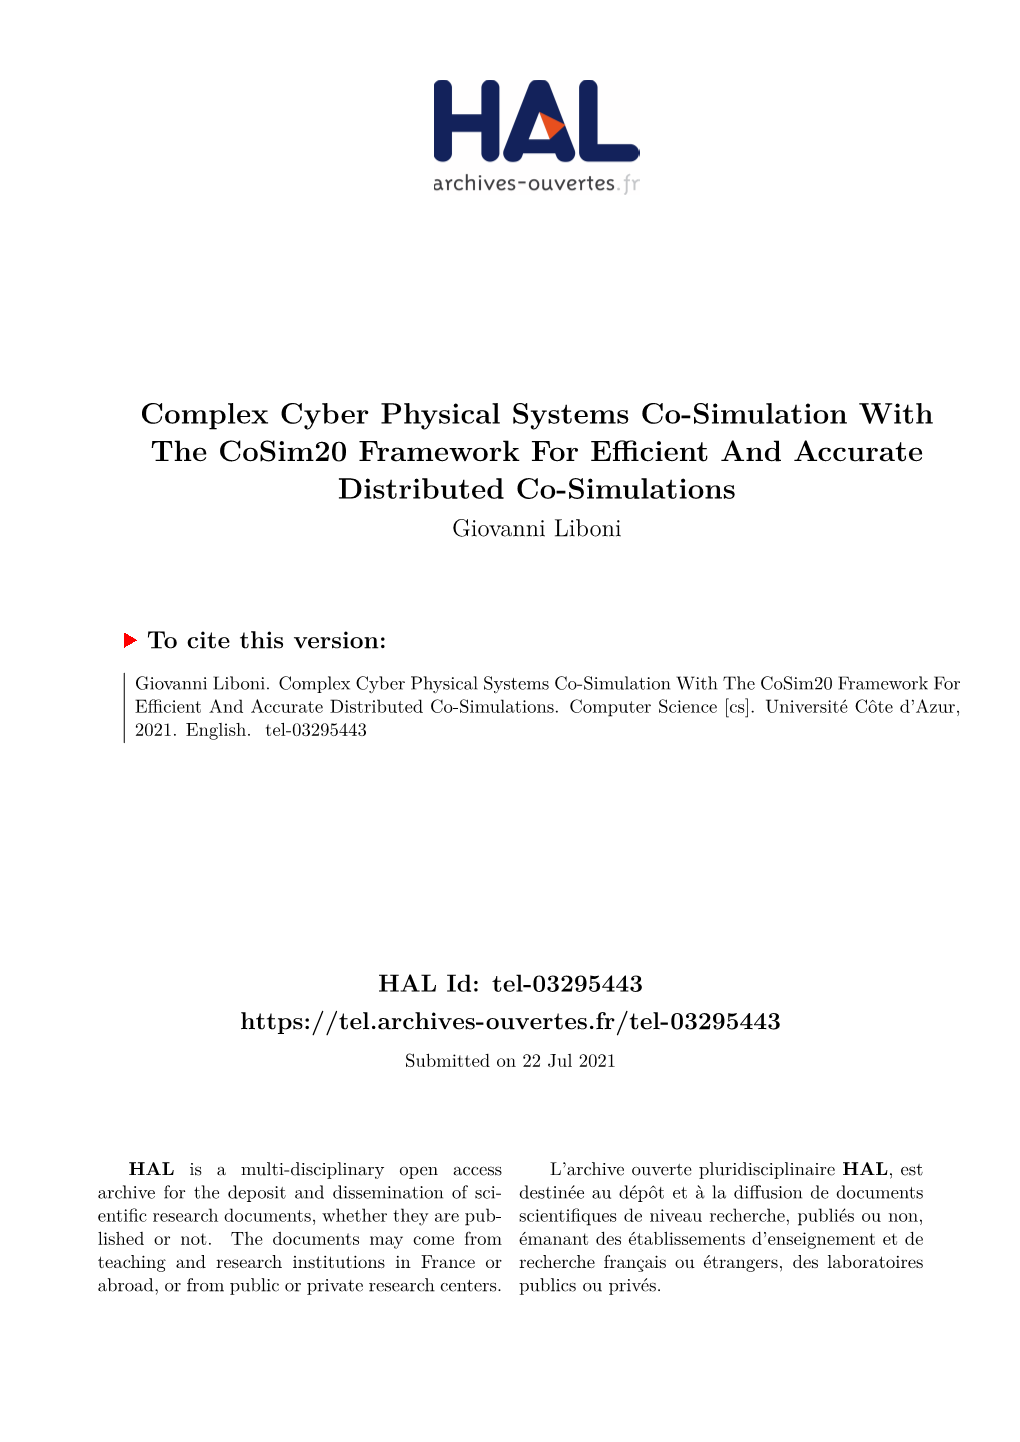 Complex Cyber Physical Systems Co-Simulation with the Cosim20 Framework for Eﬀicient and Accurate Distributed Co-Simulations Giovanni Liboni